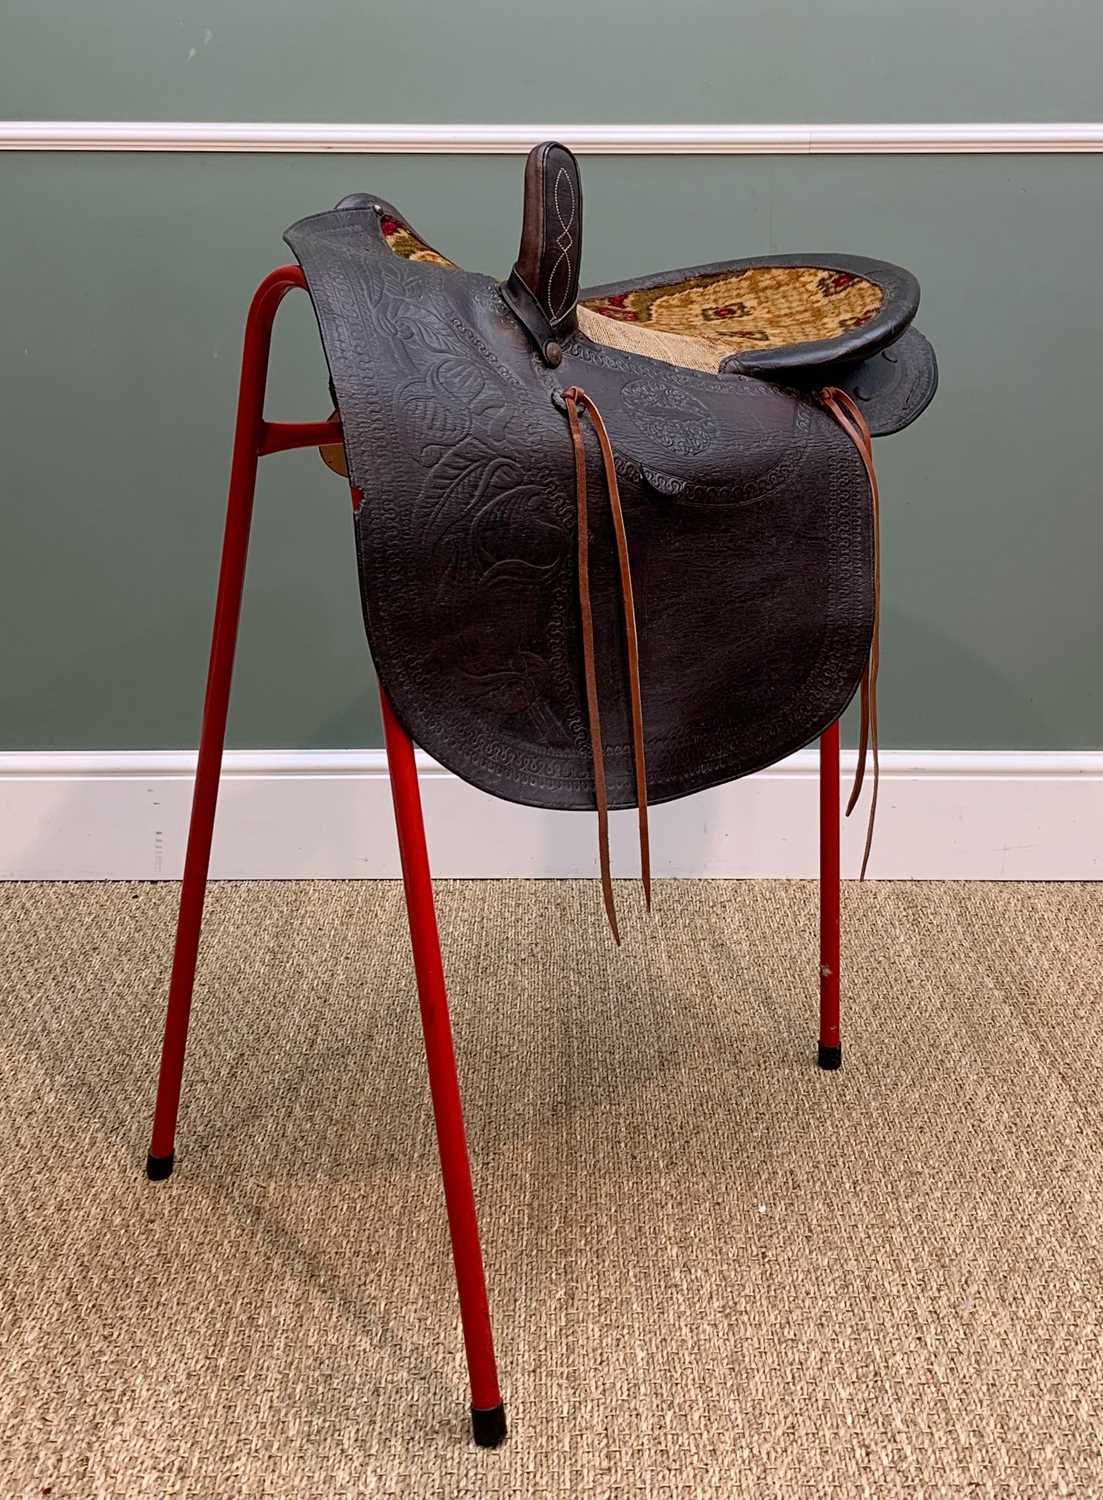 THE EQUESTRIAN CLUB HOUSE: TEXAS SIDE SADDLE, c. 1880, tooled leather and carpet seat, 66cms long - Image 2 of 5